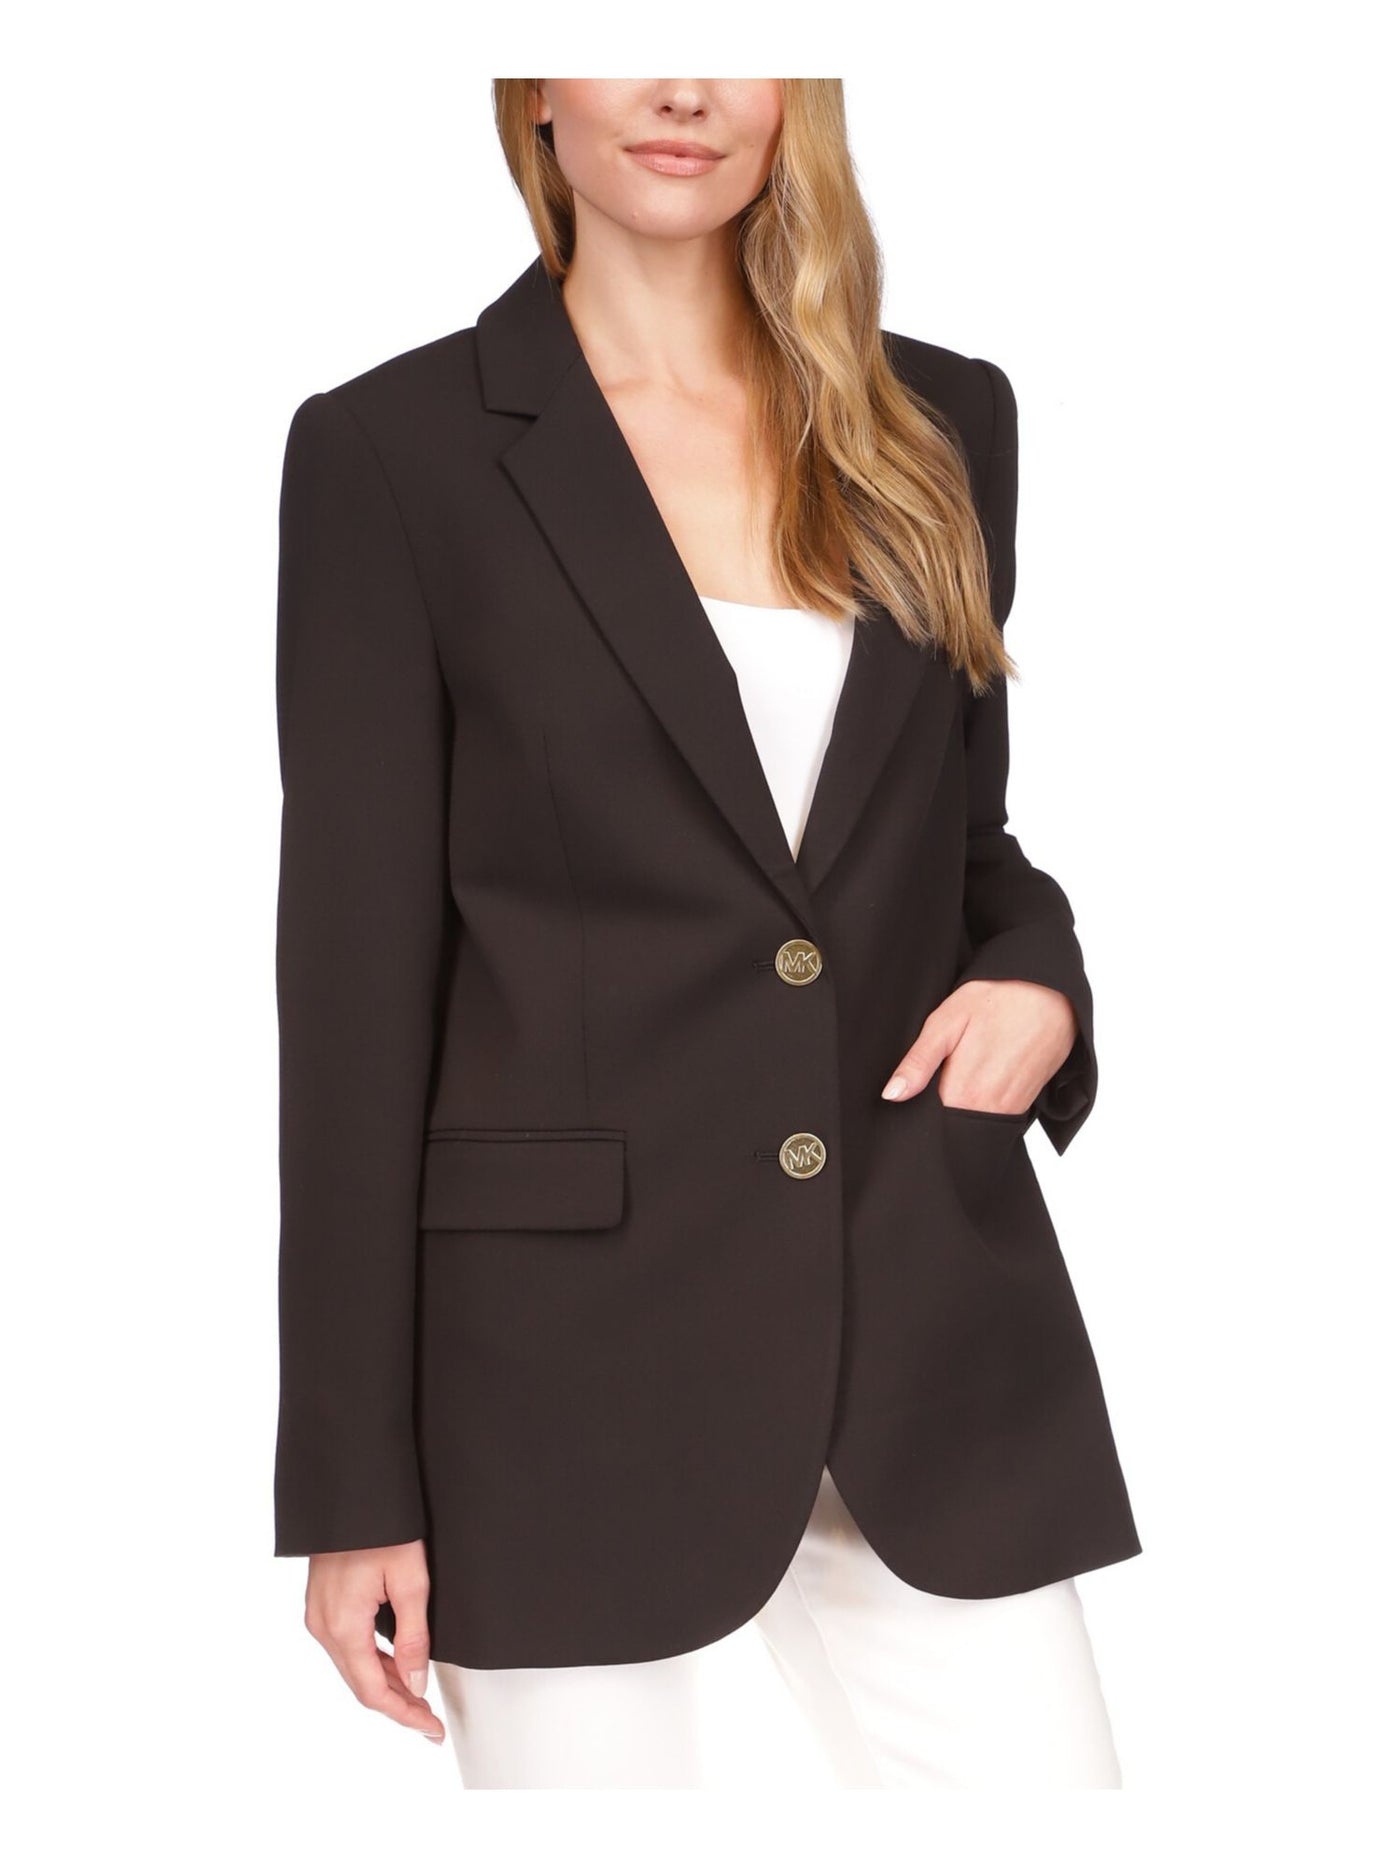 MICHAEL MICHAEL KORS Womens Black Pocketed Lined Notch Lapels Two-button Closure Wear To Work Blazer Jacket 10